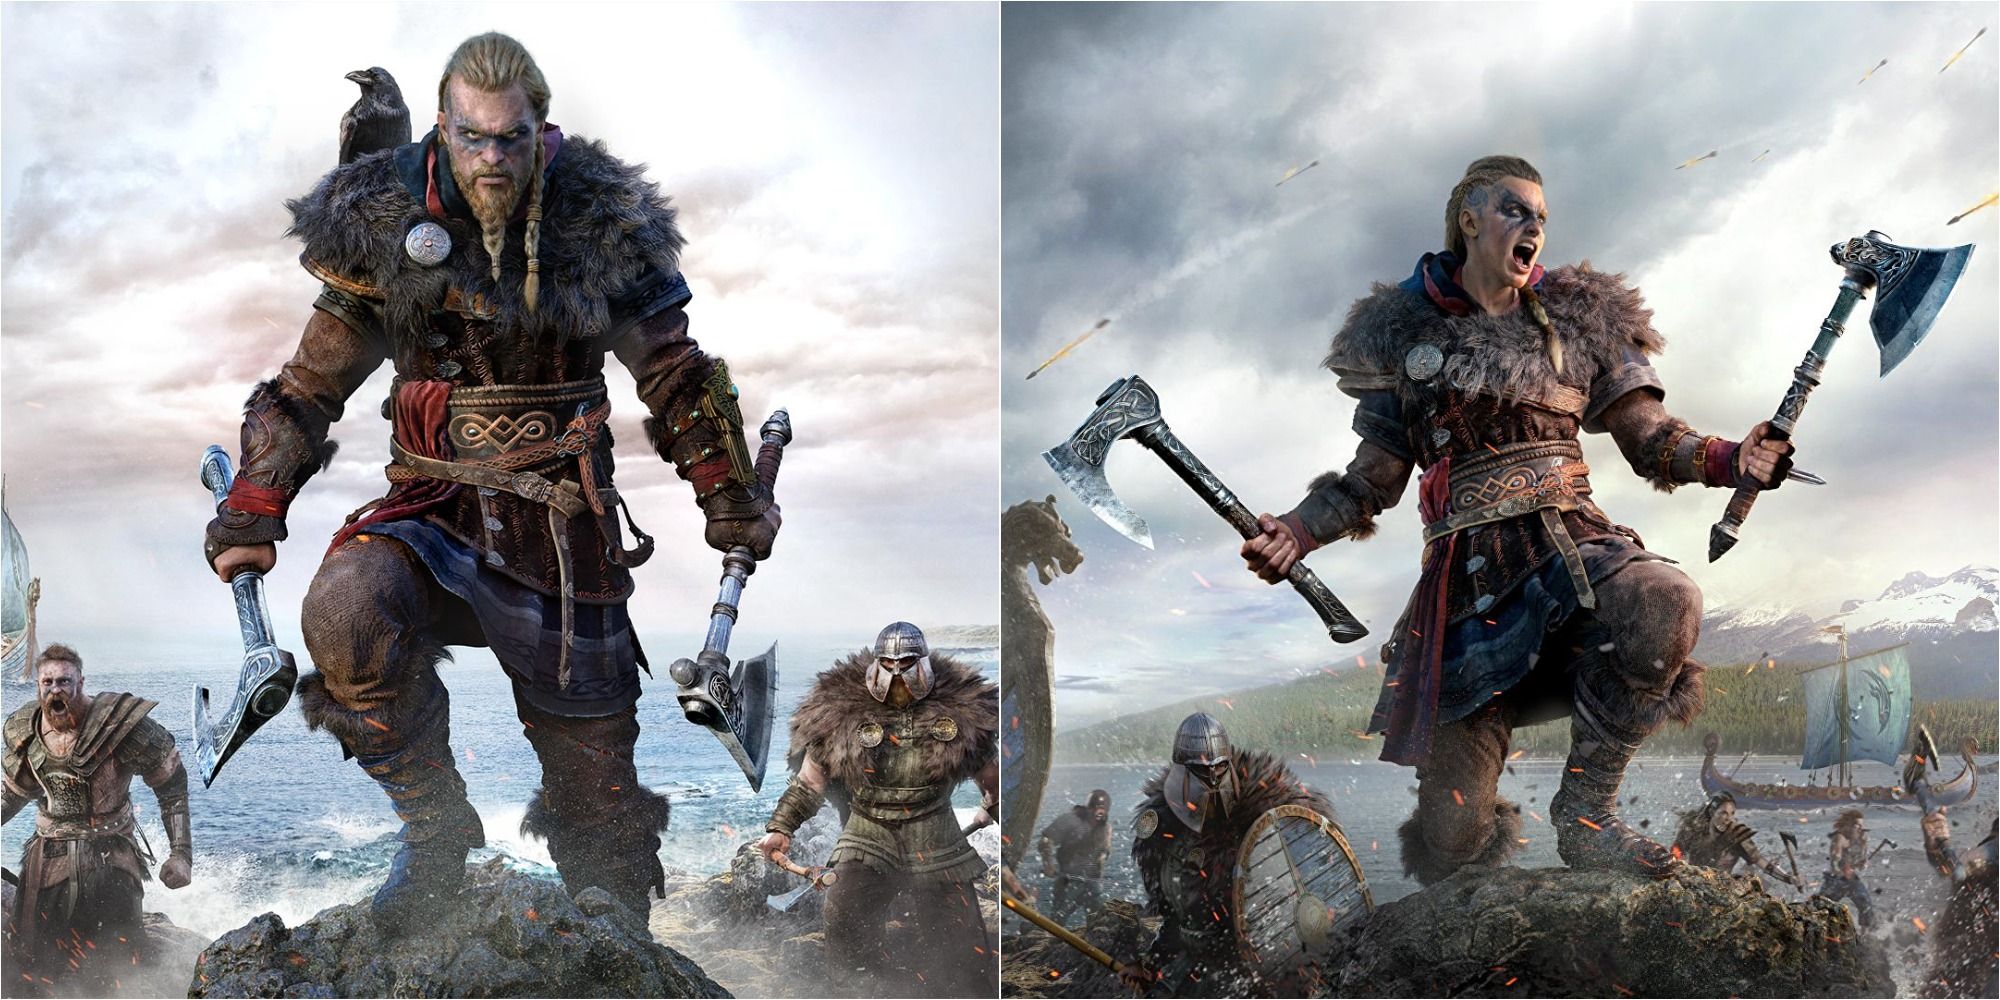 Assassin's Creed Valhalla Split Image Showing Eivor Signature Outfit